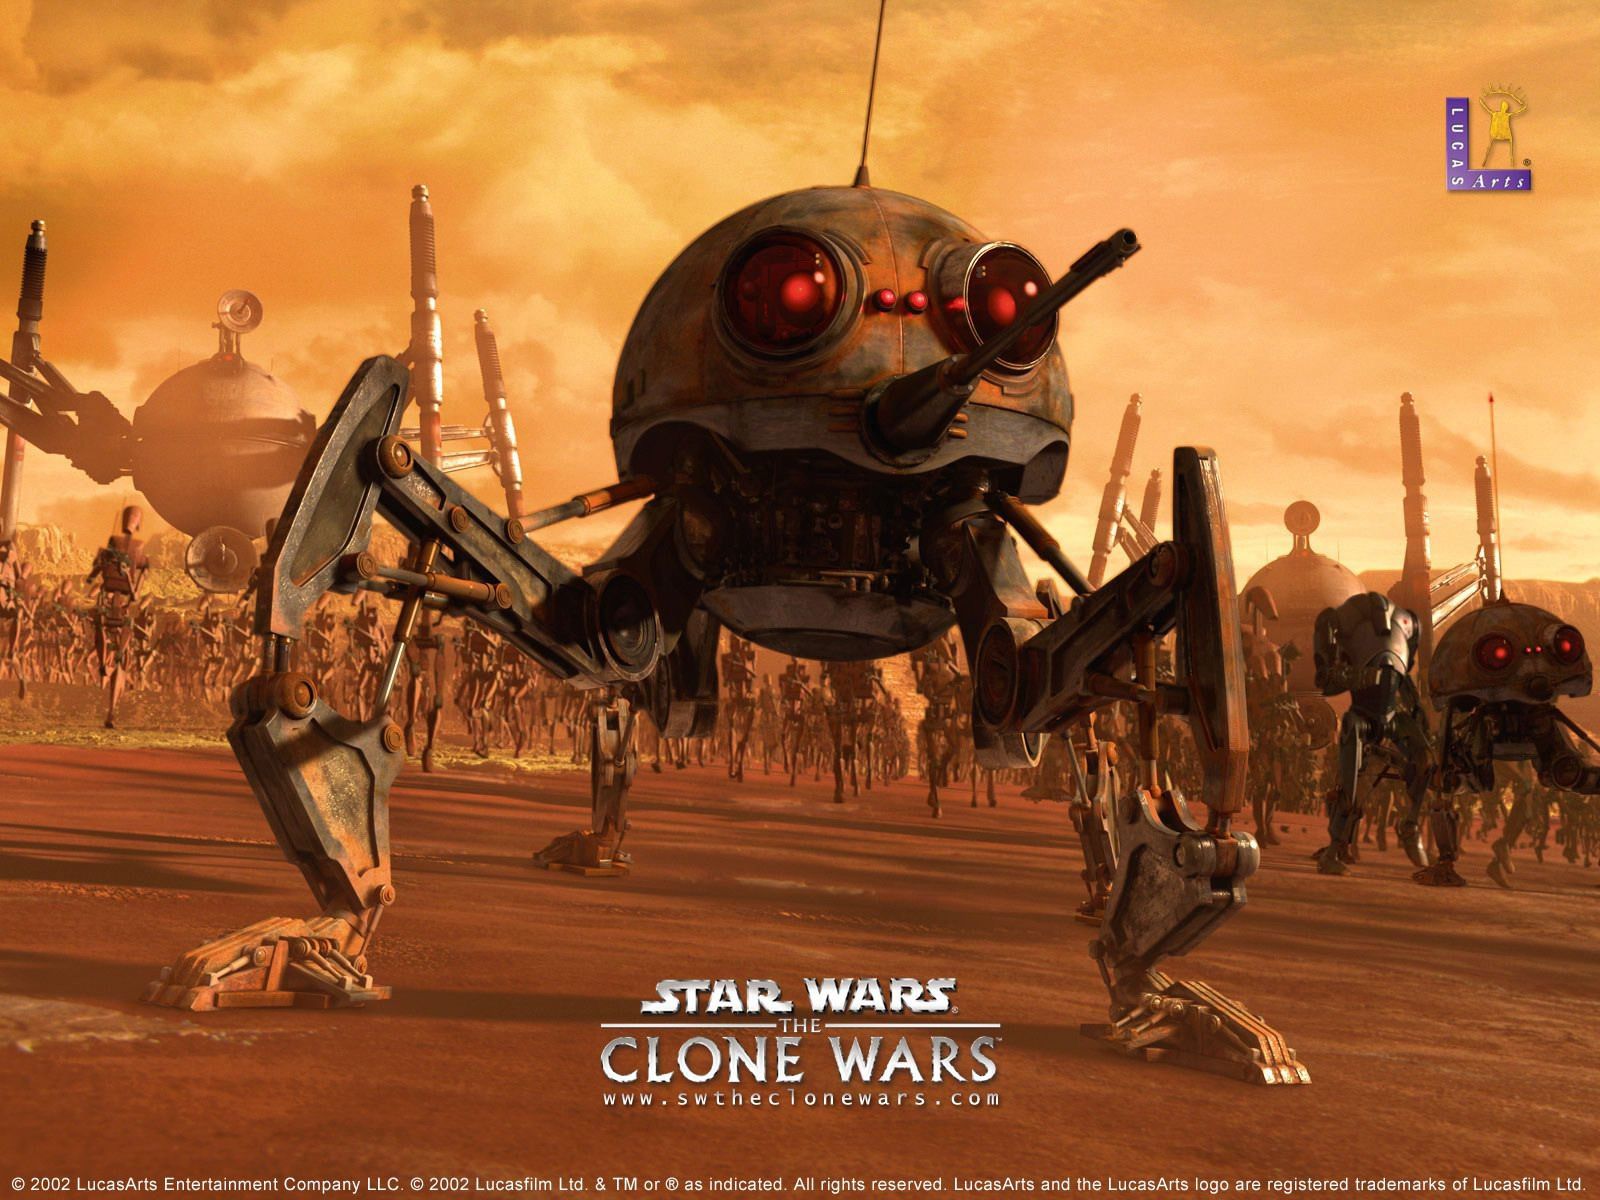 Star Wars The Clone Wars Robotic Weapons 1 1600×1200. Awesome